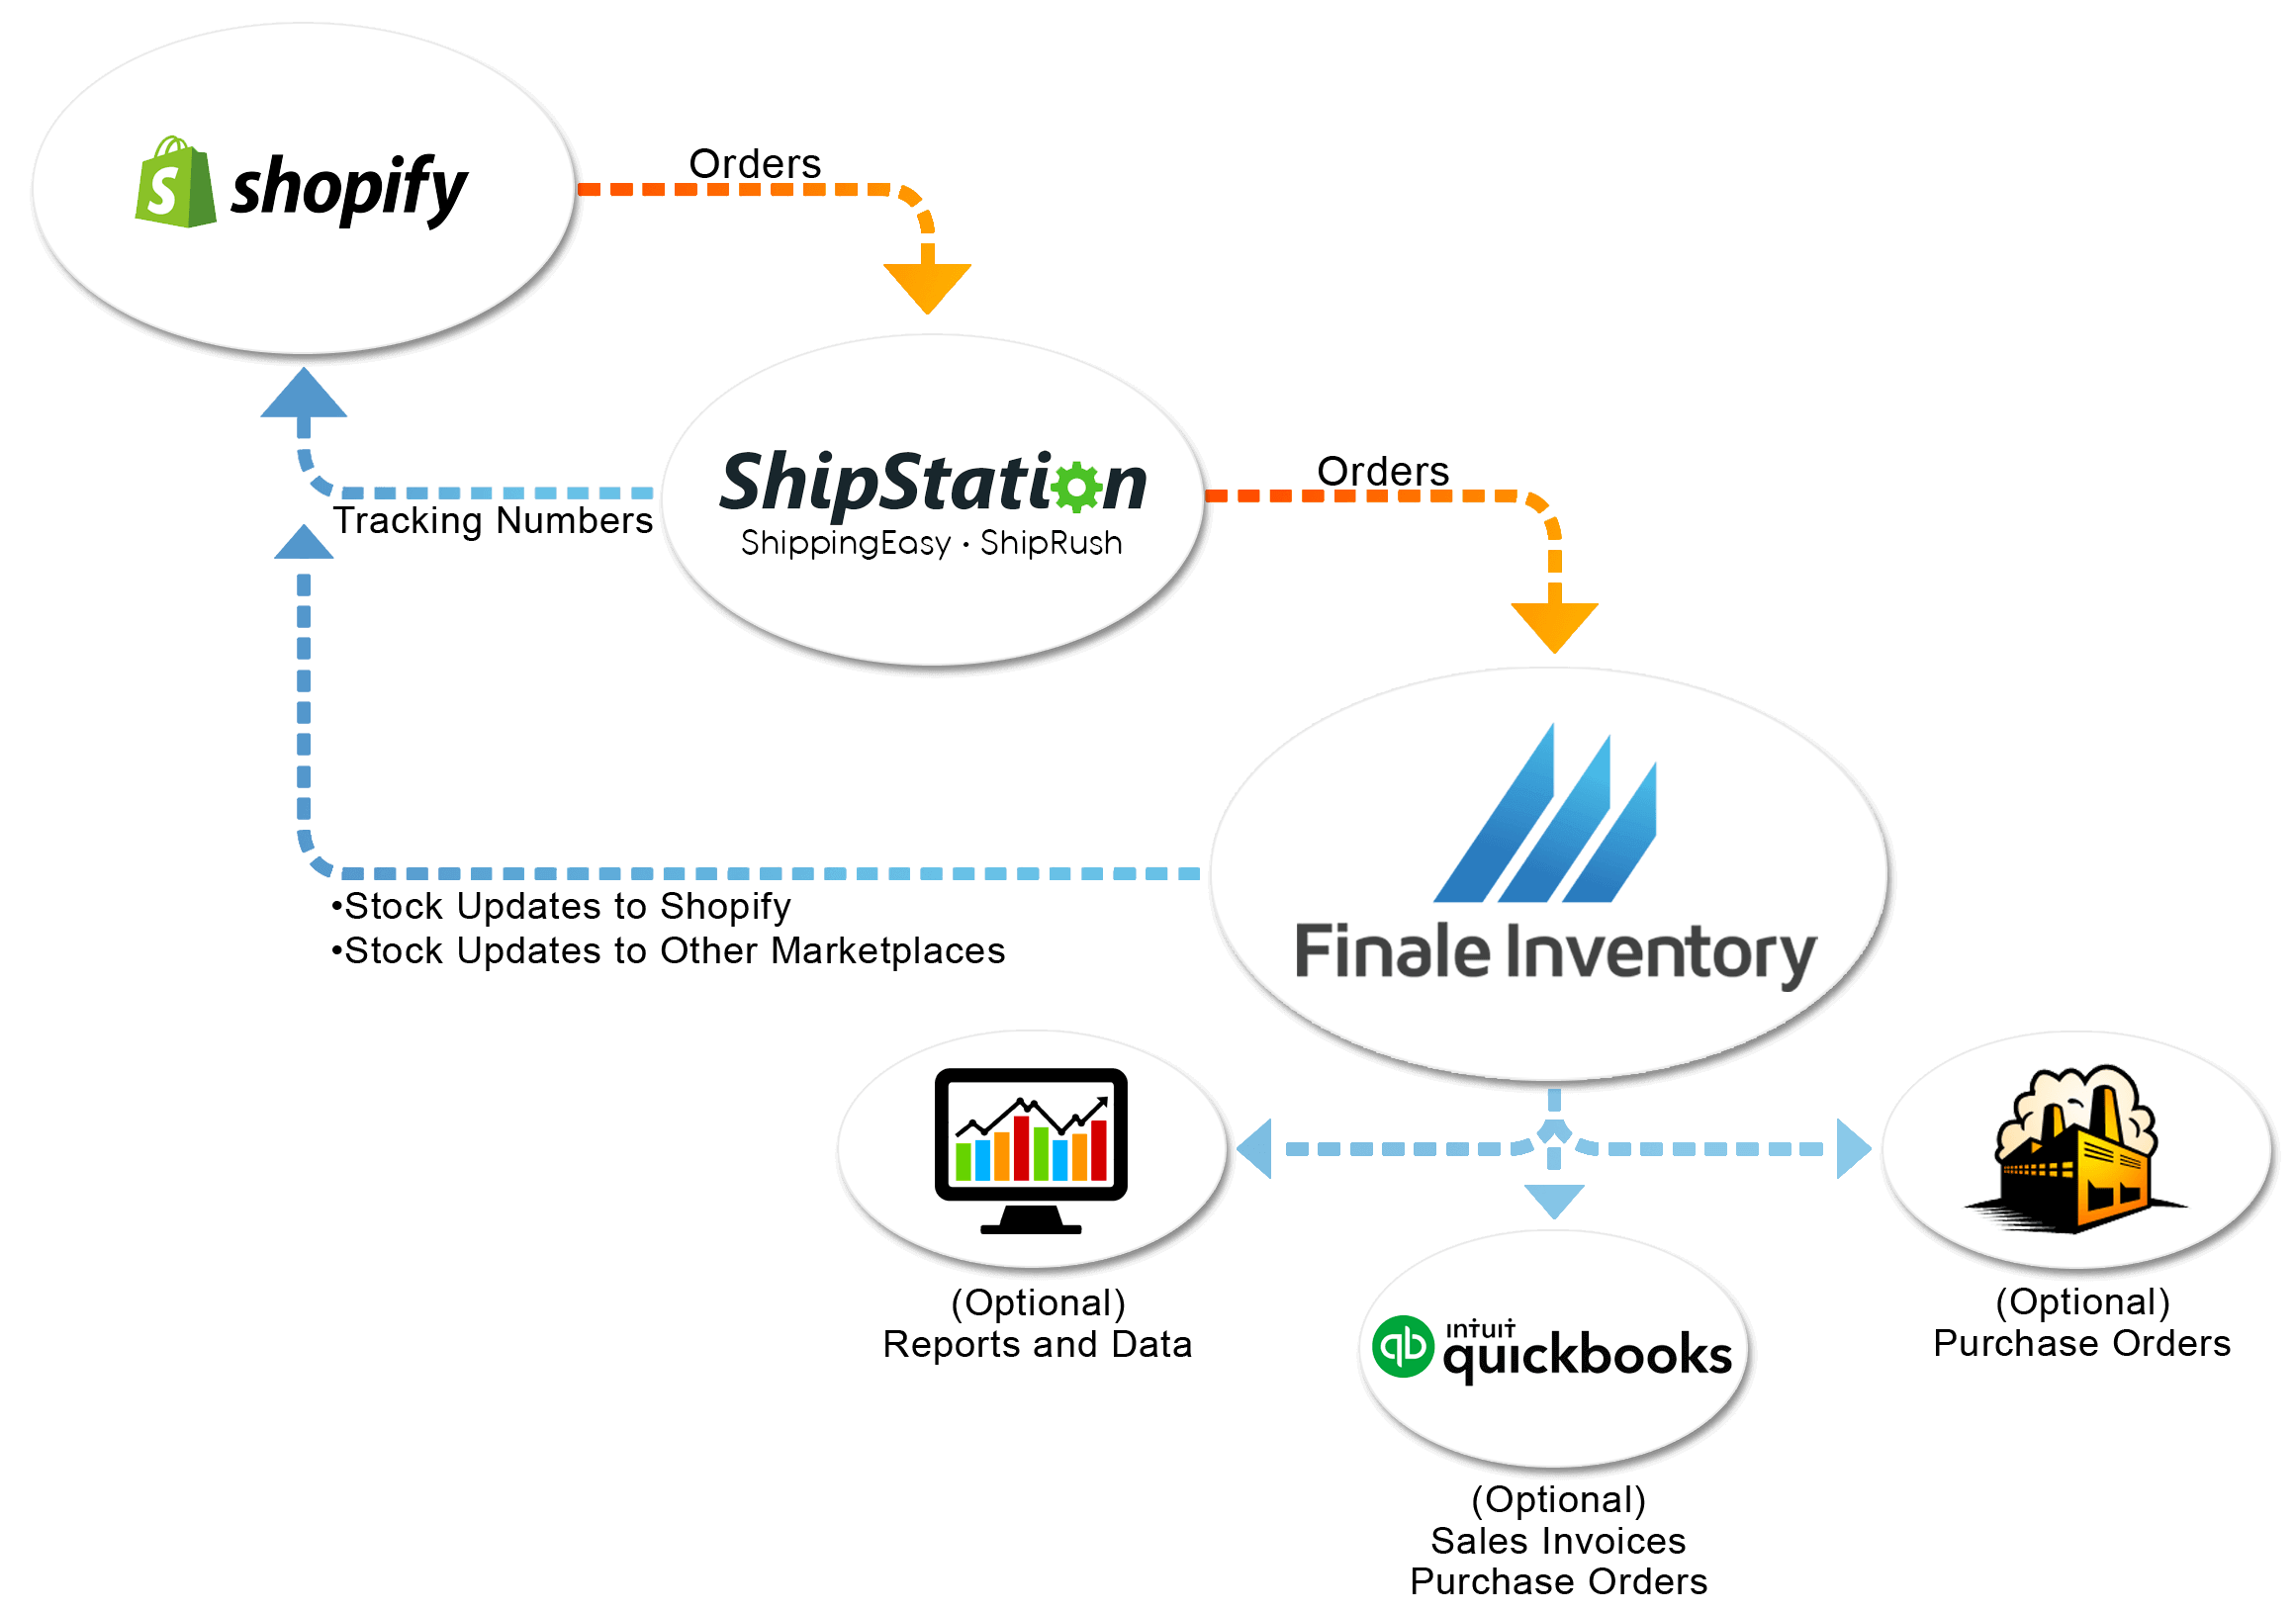 Shopify Finale Inventory inventory management software integration shipping flow chart.